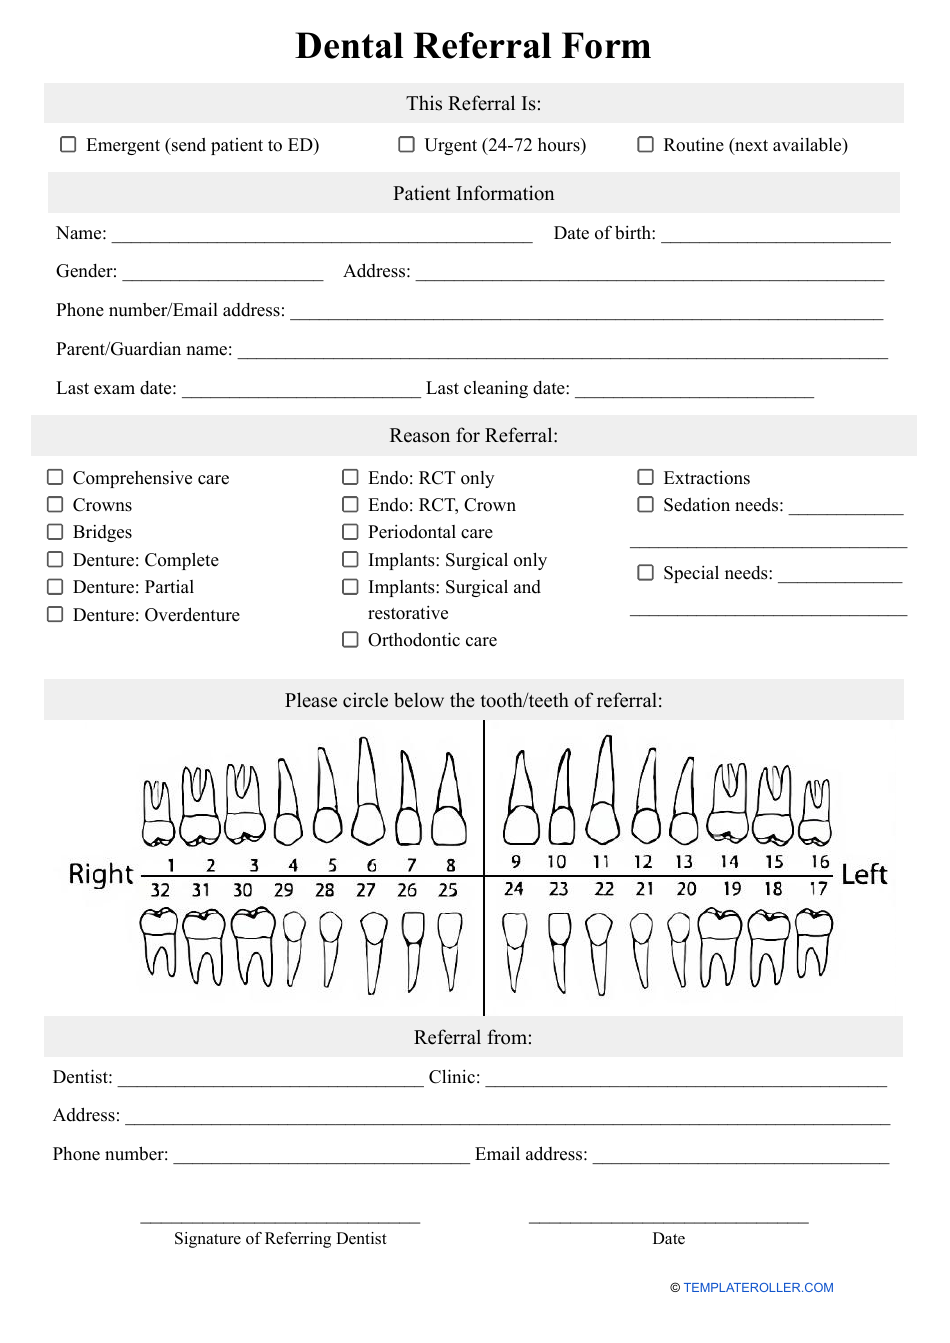 Dental Referral Form Fill Out Sign Online And Download Pdf Templateroller 7875